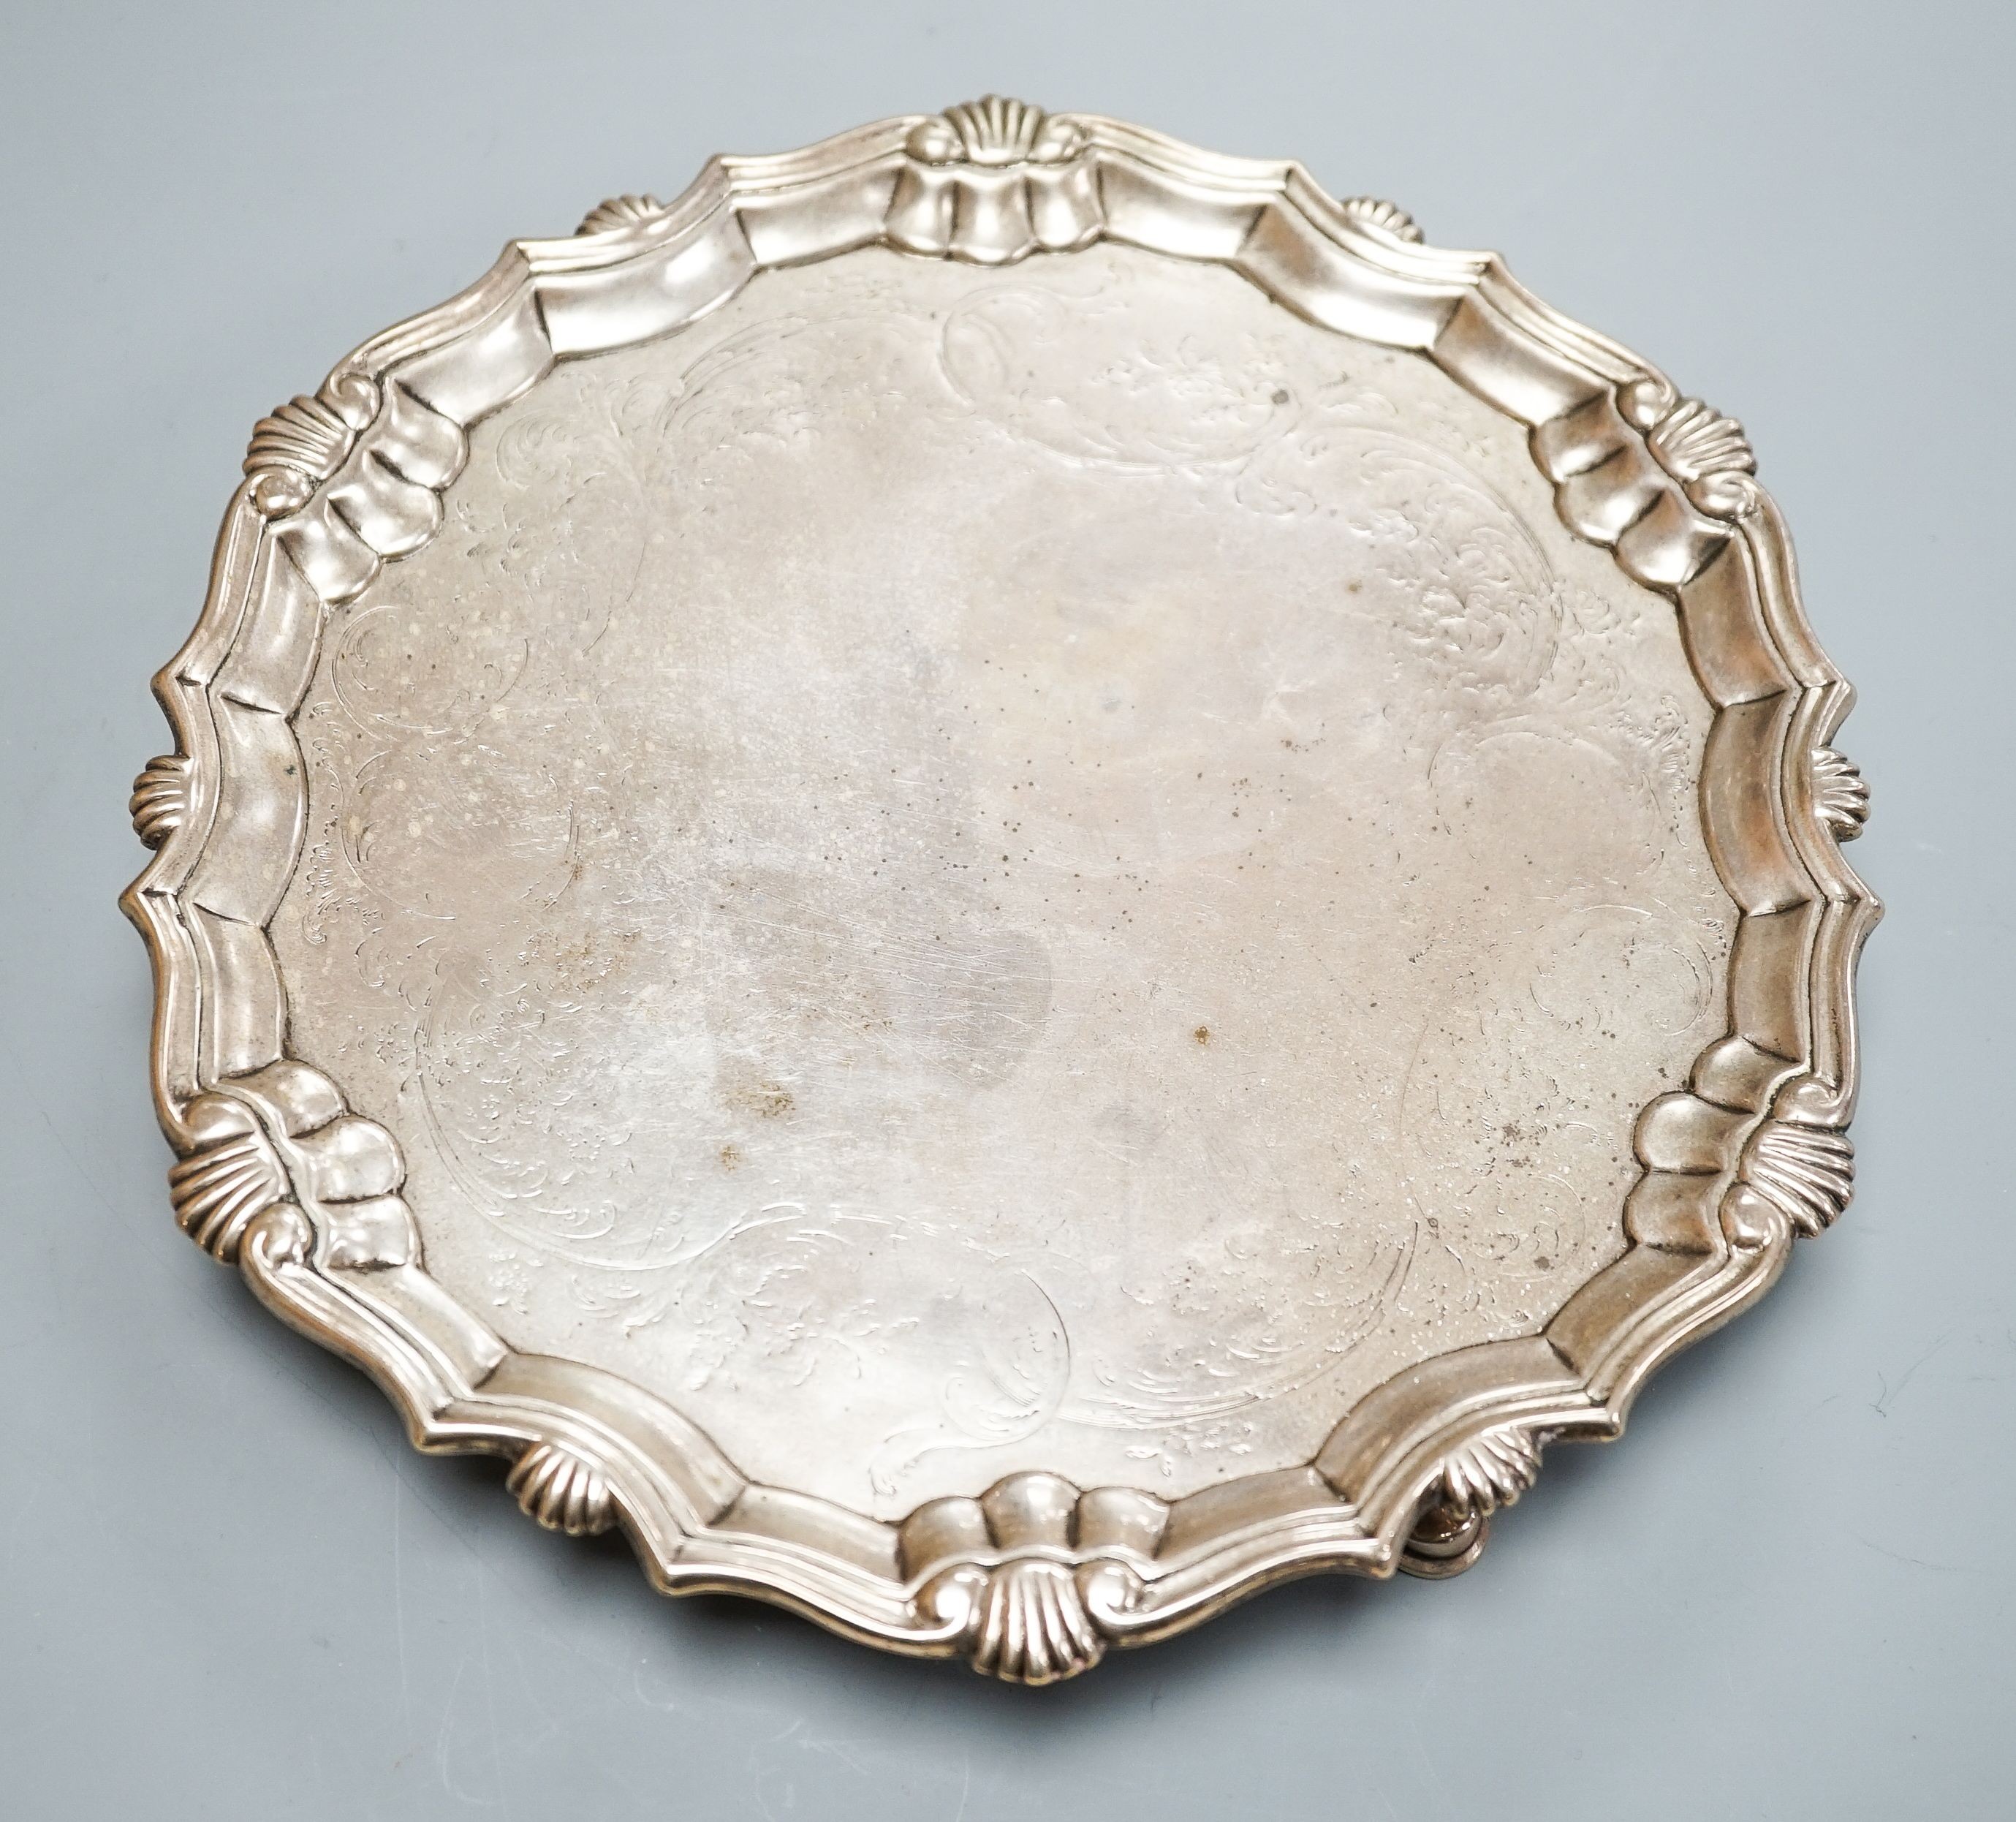 A George II silver waiter, with later engraved decoration, Robert Abercrombie, London, 1739, 20.7cm, 12.5oz.